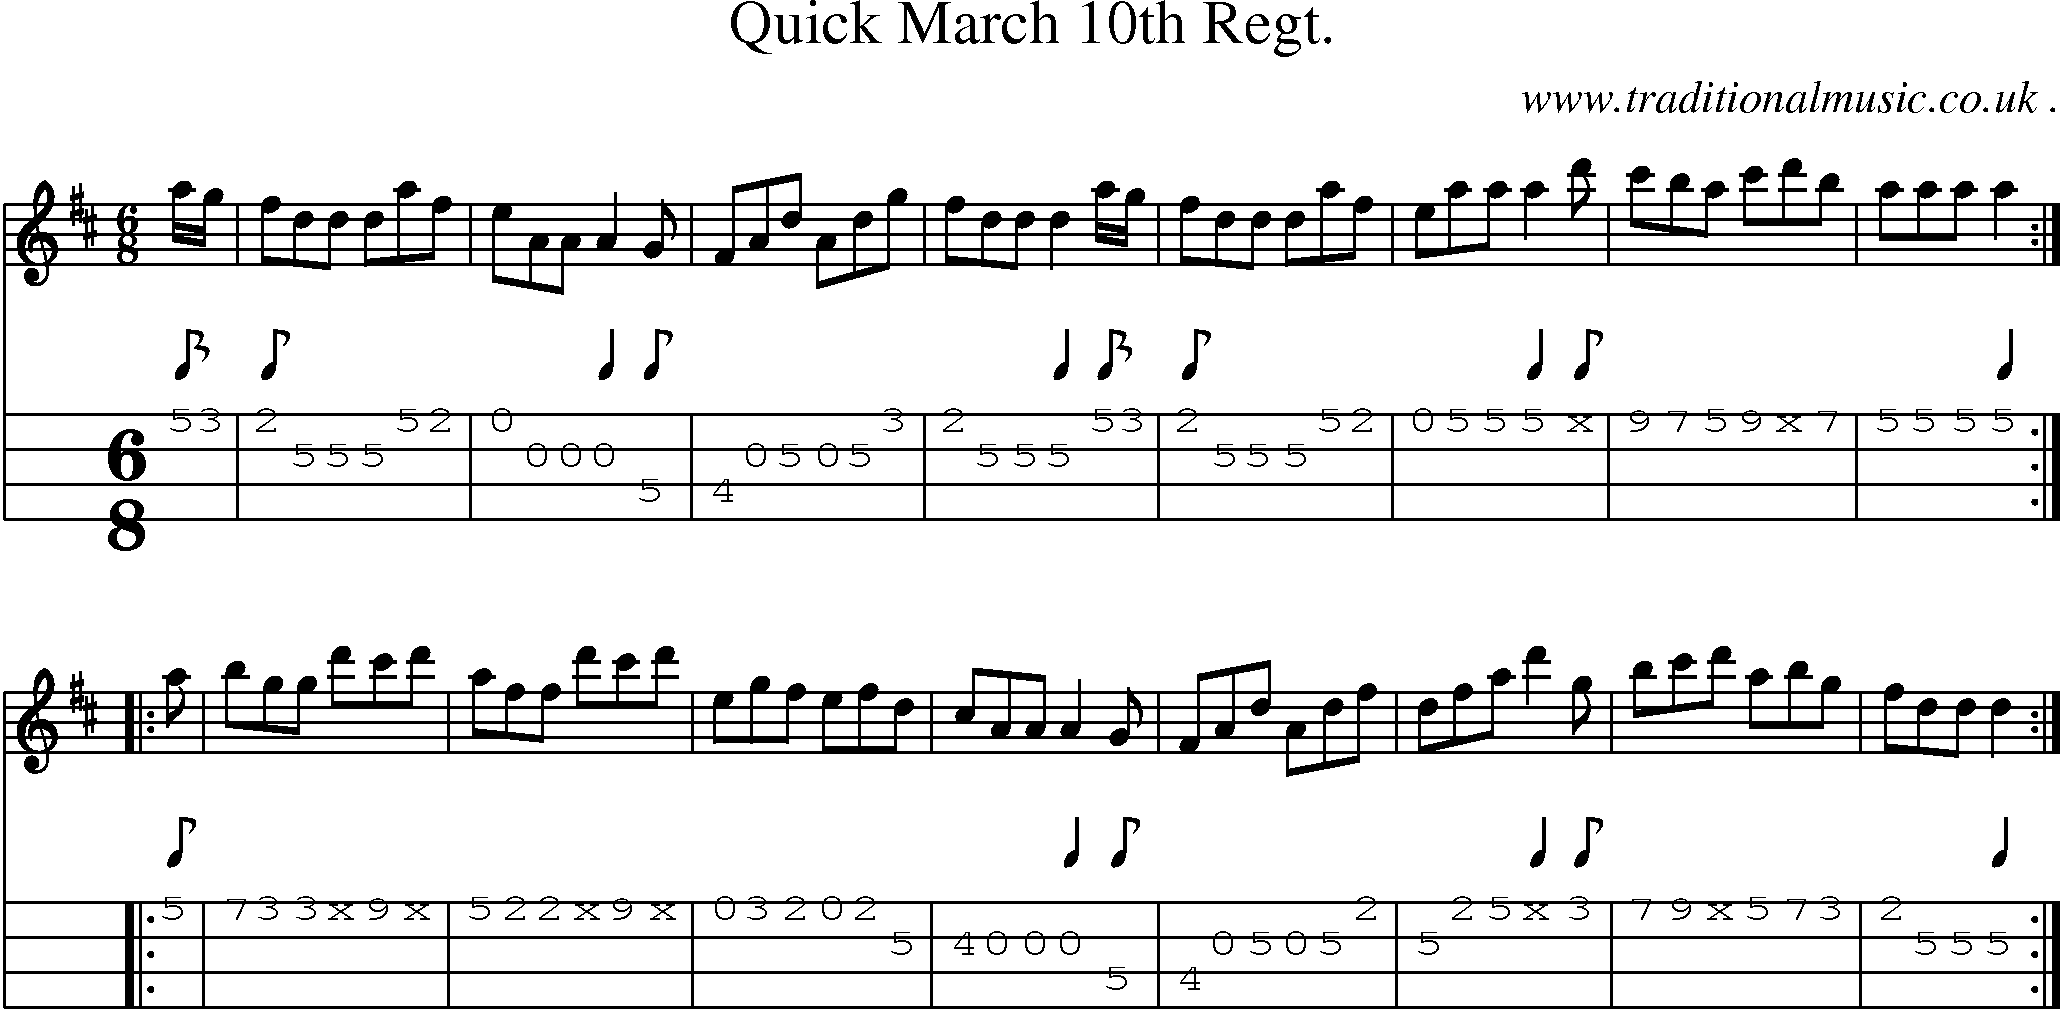 Sheet-music  score, Chords and Mandolin Tabs for Quick March 10th Regt